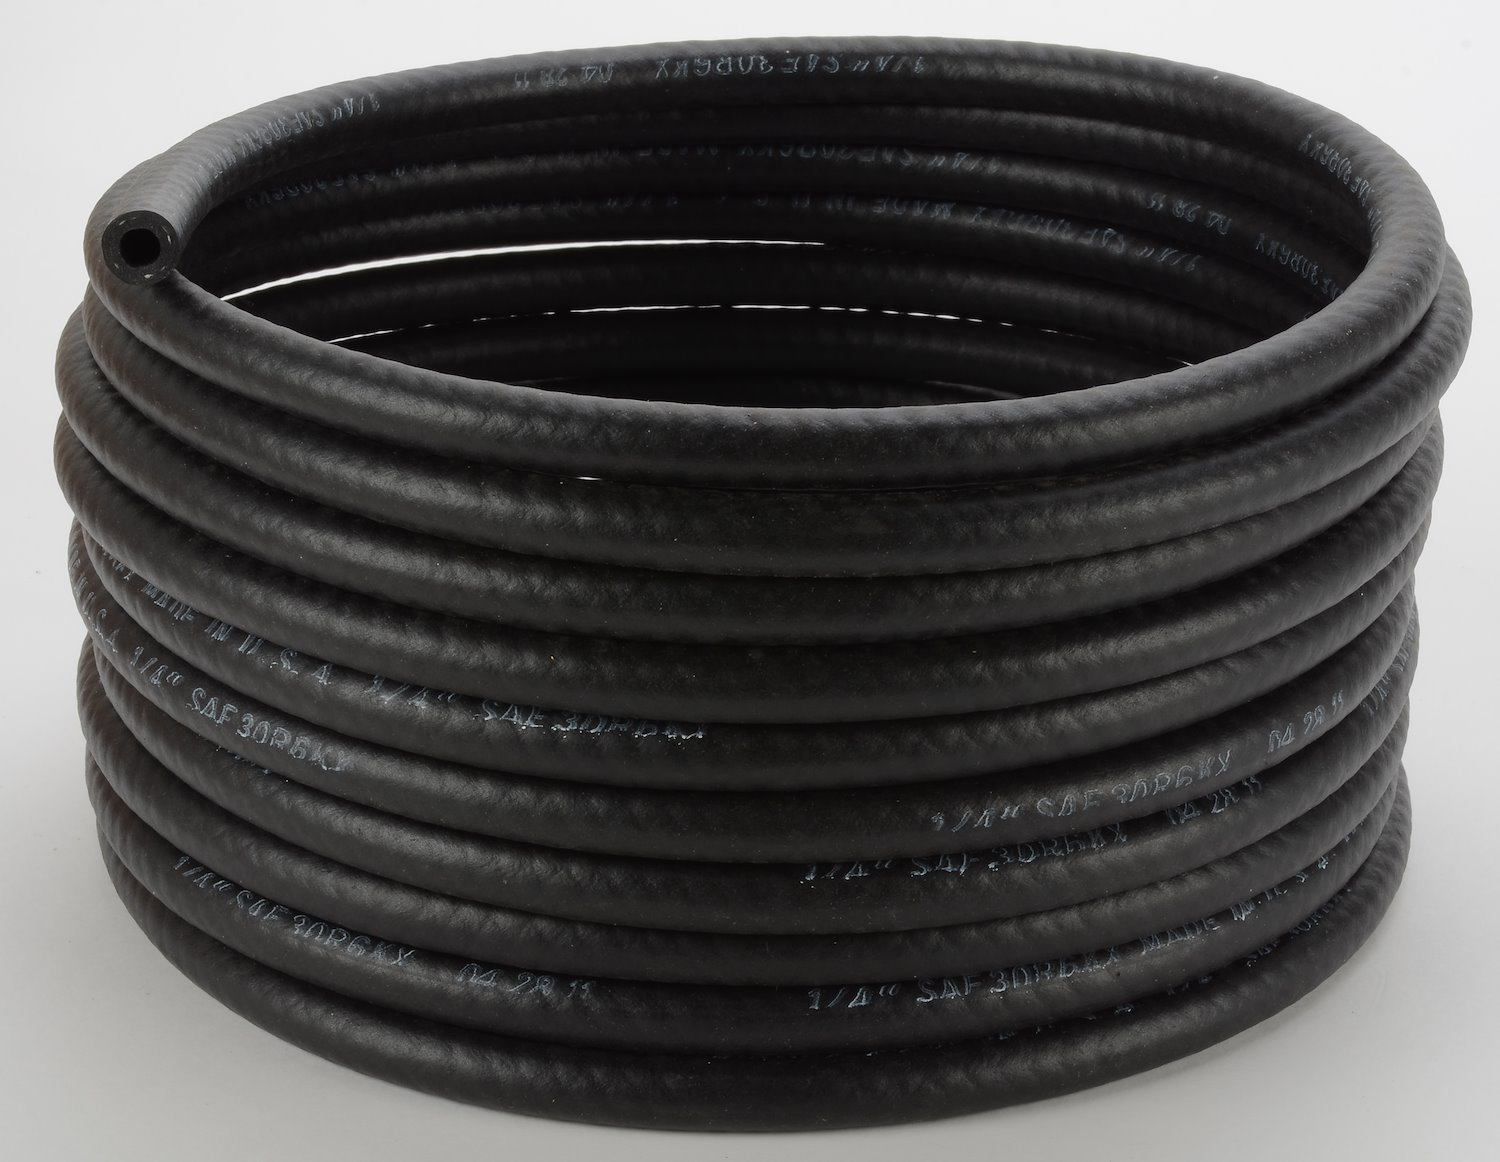 Universal Fuel Hose [1/4 in. I.D. x 25 ft.]